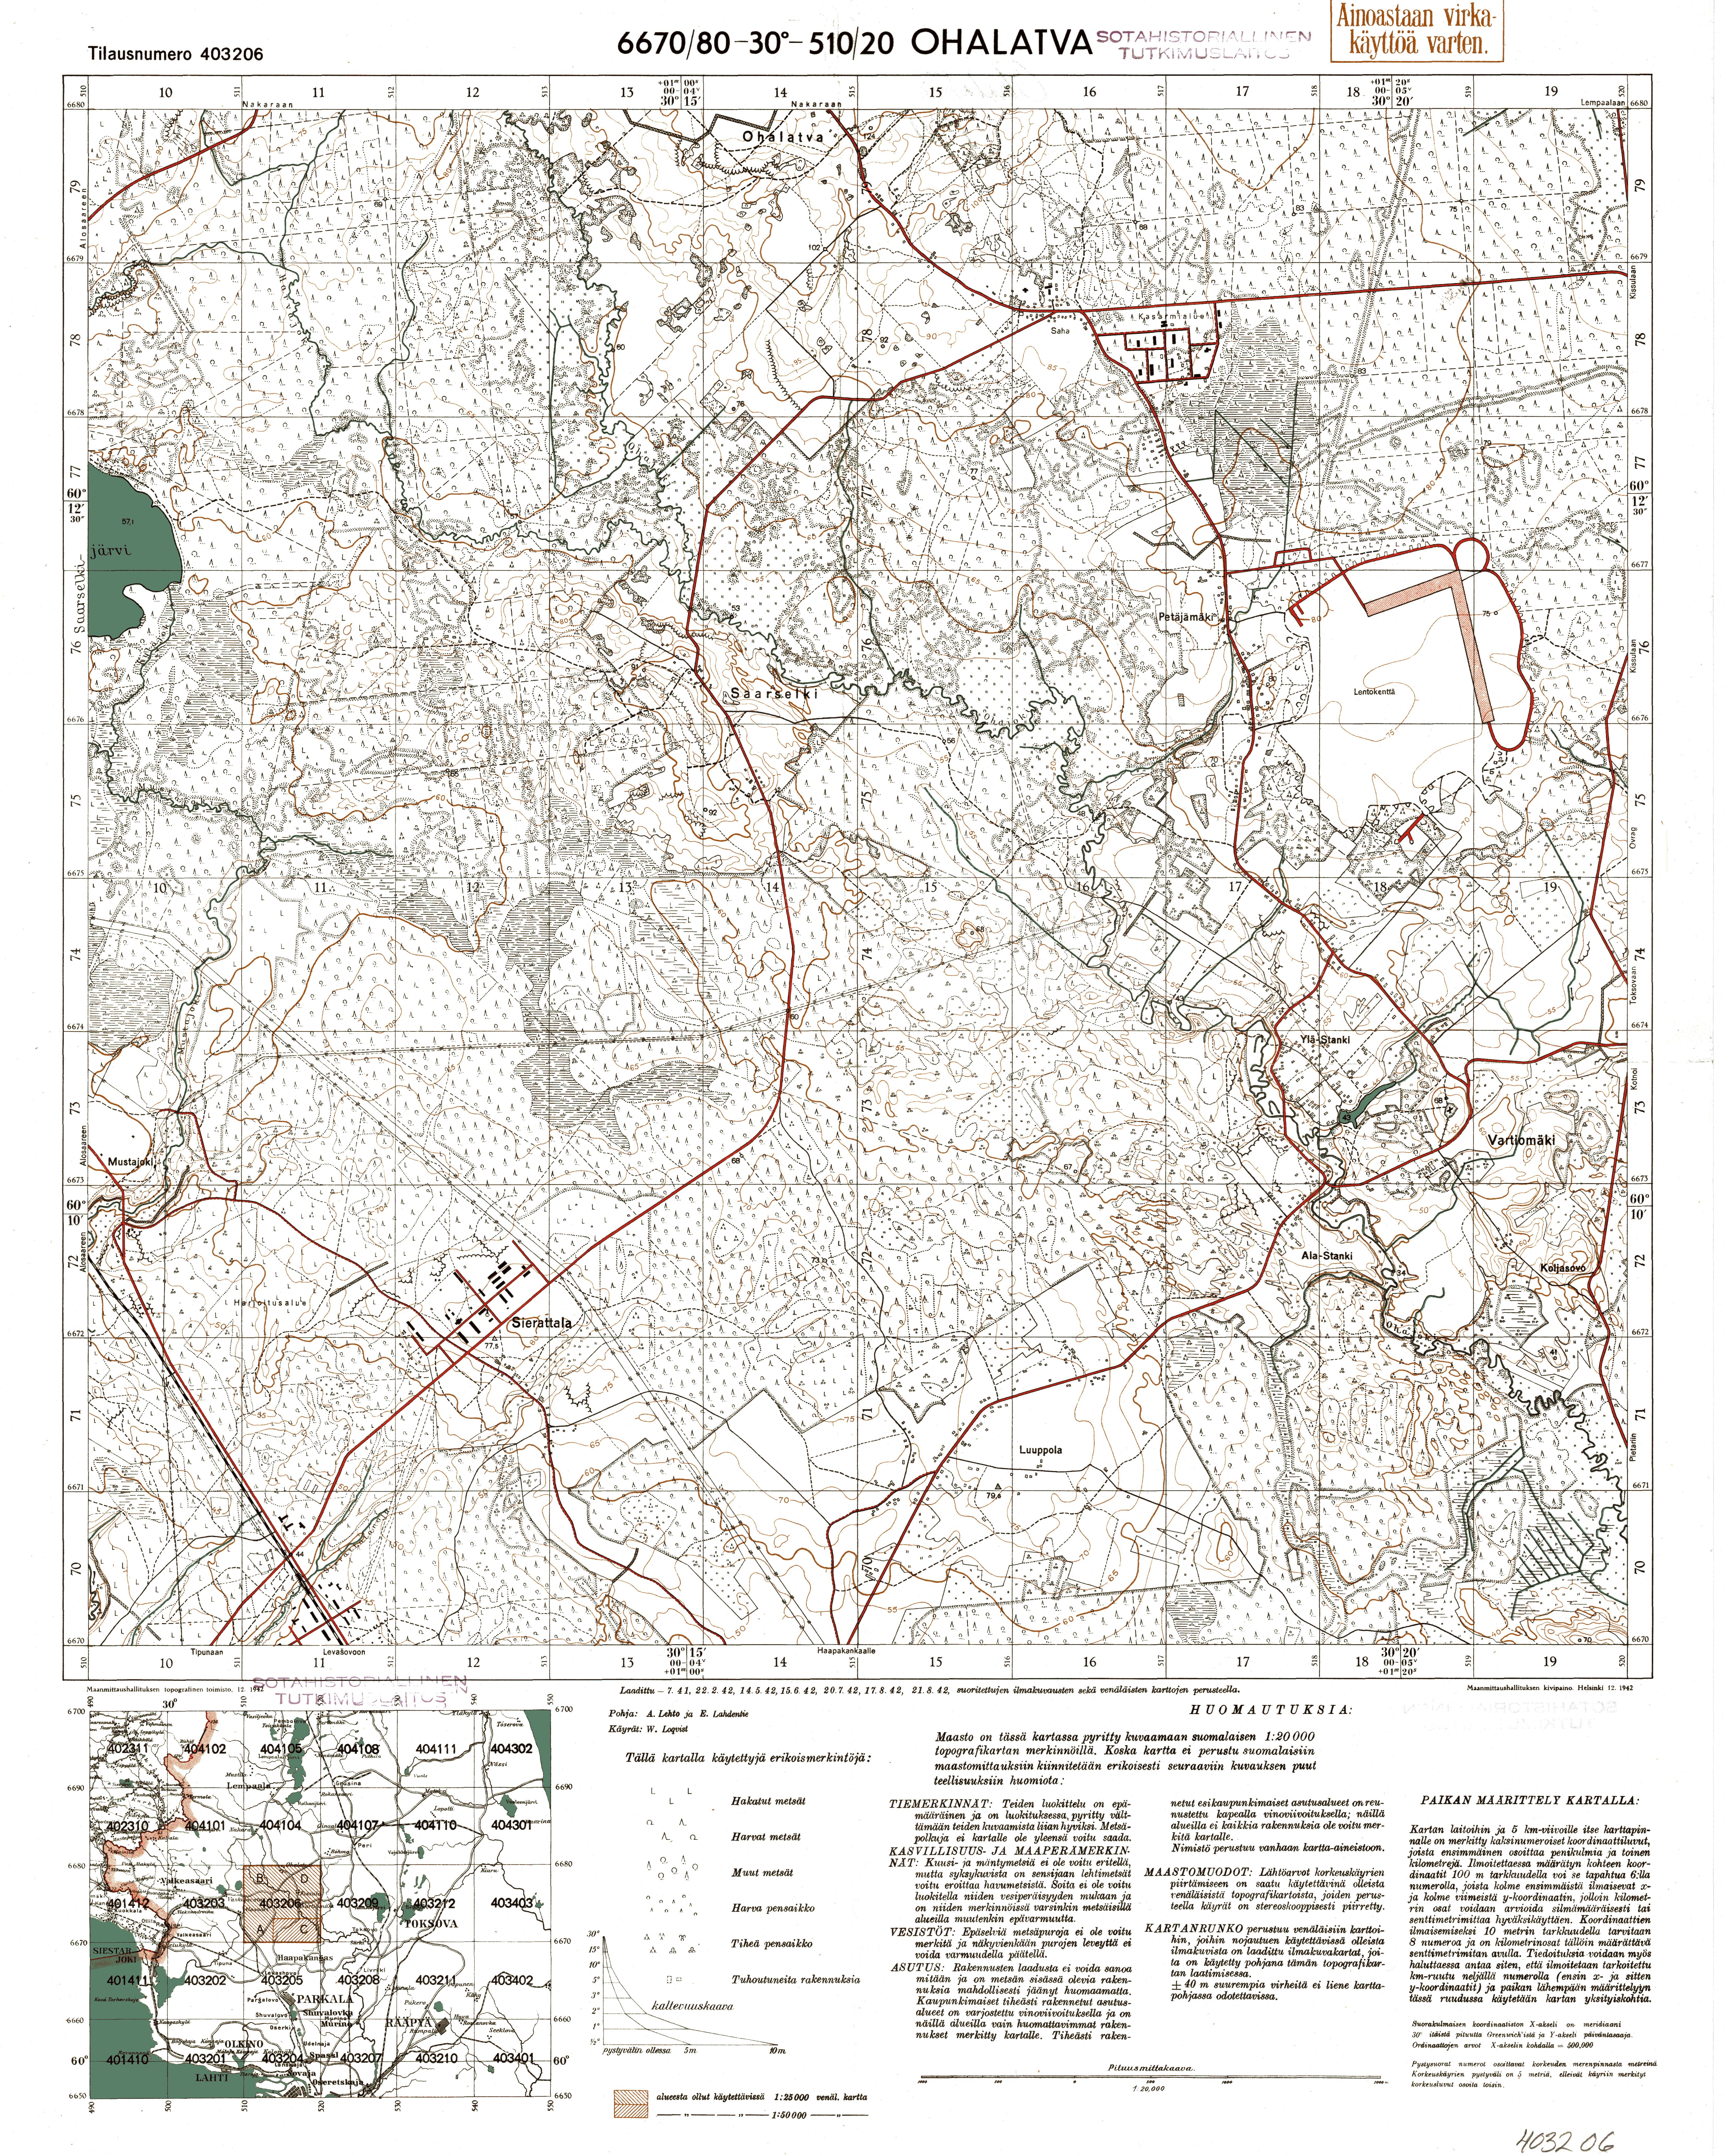 Agalatovo. Ohalatva. Topografikartta 403206. Topographic map from 1943. Use the zooming tool to explore in higher level of detail. Obtain as a quality print or high resolution image